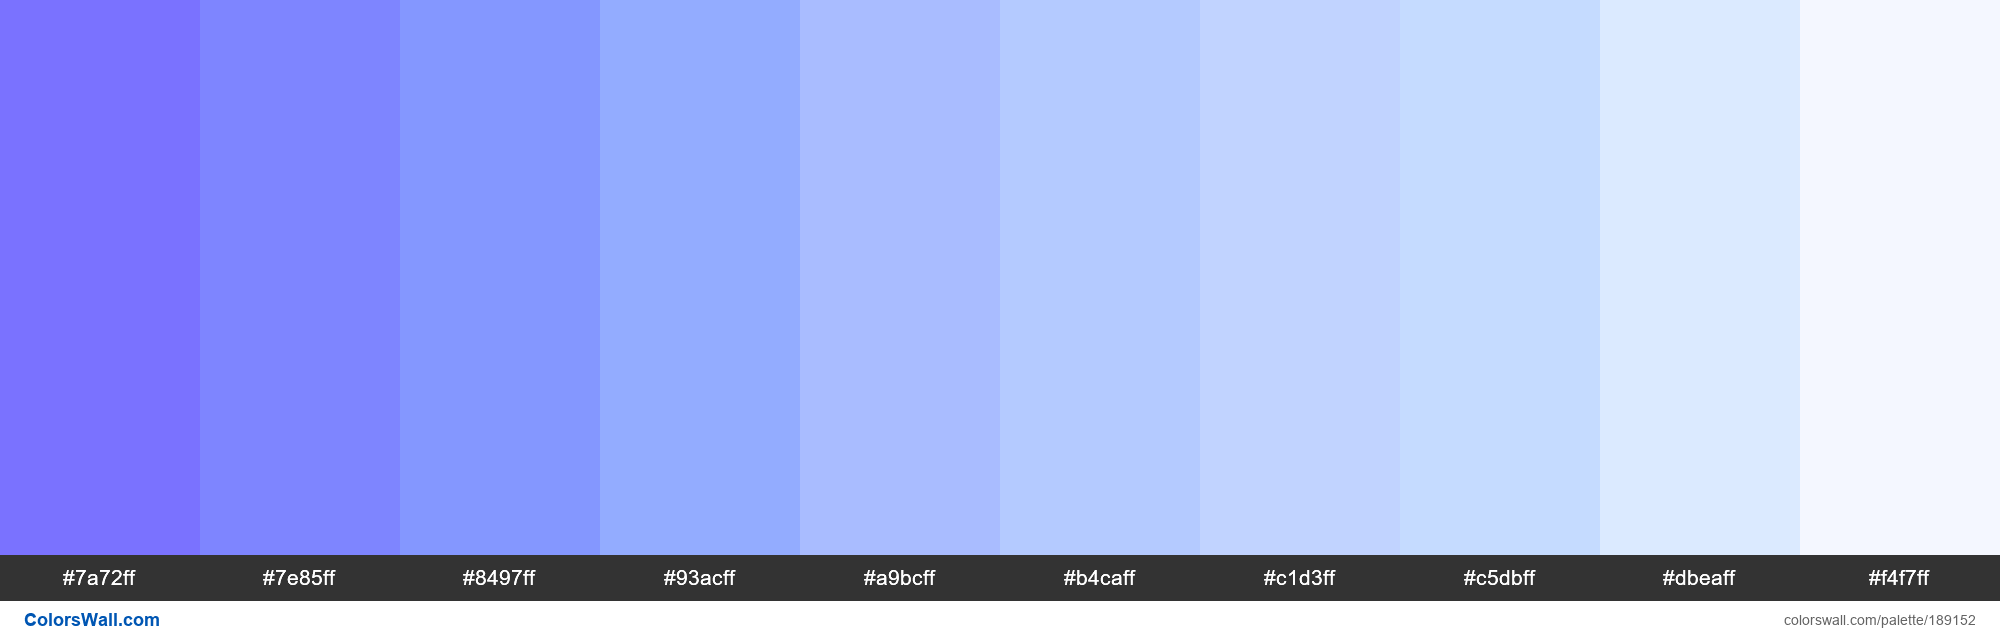 Shades Of Blue Color Scheme Periwinkle Marian Blue Powder